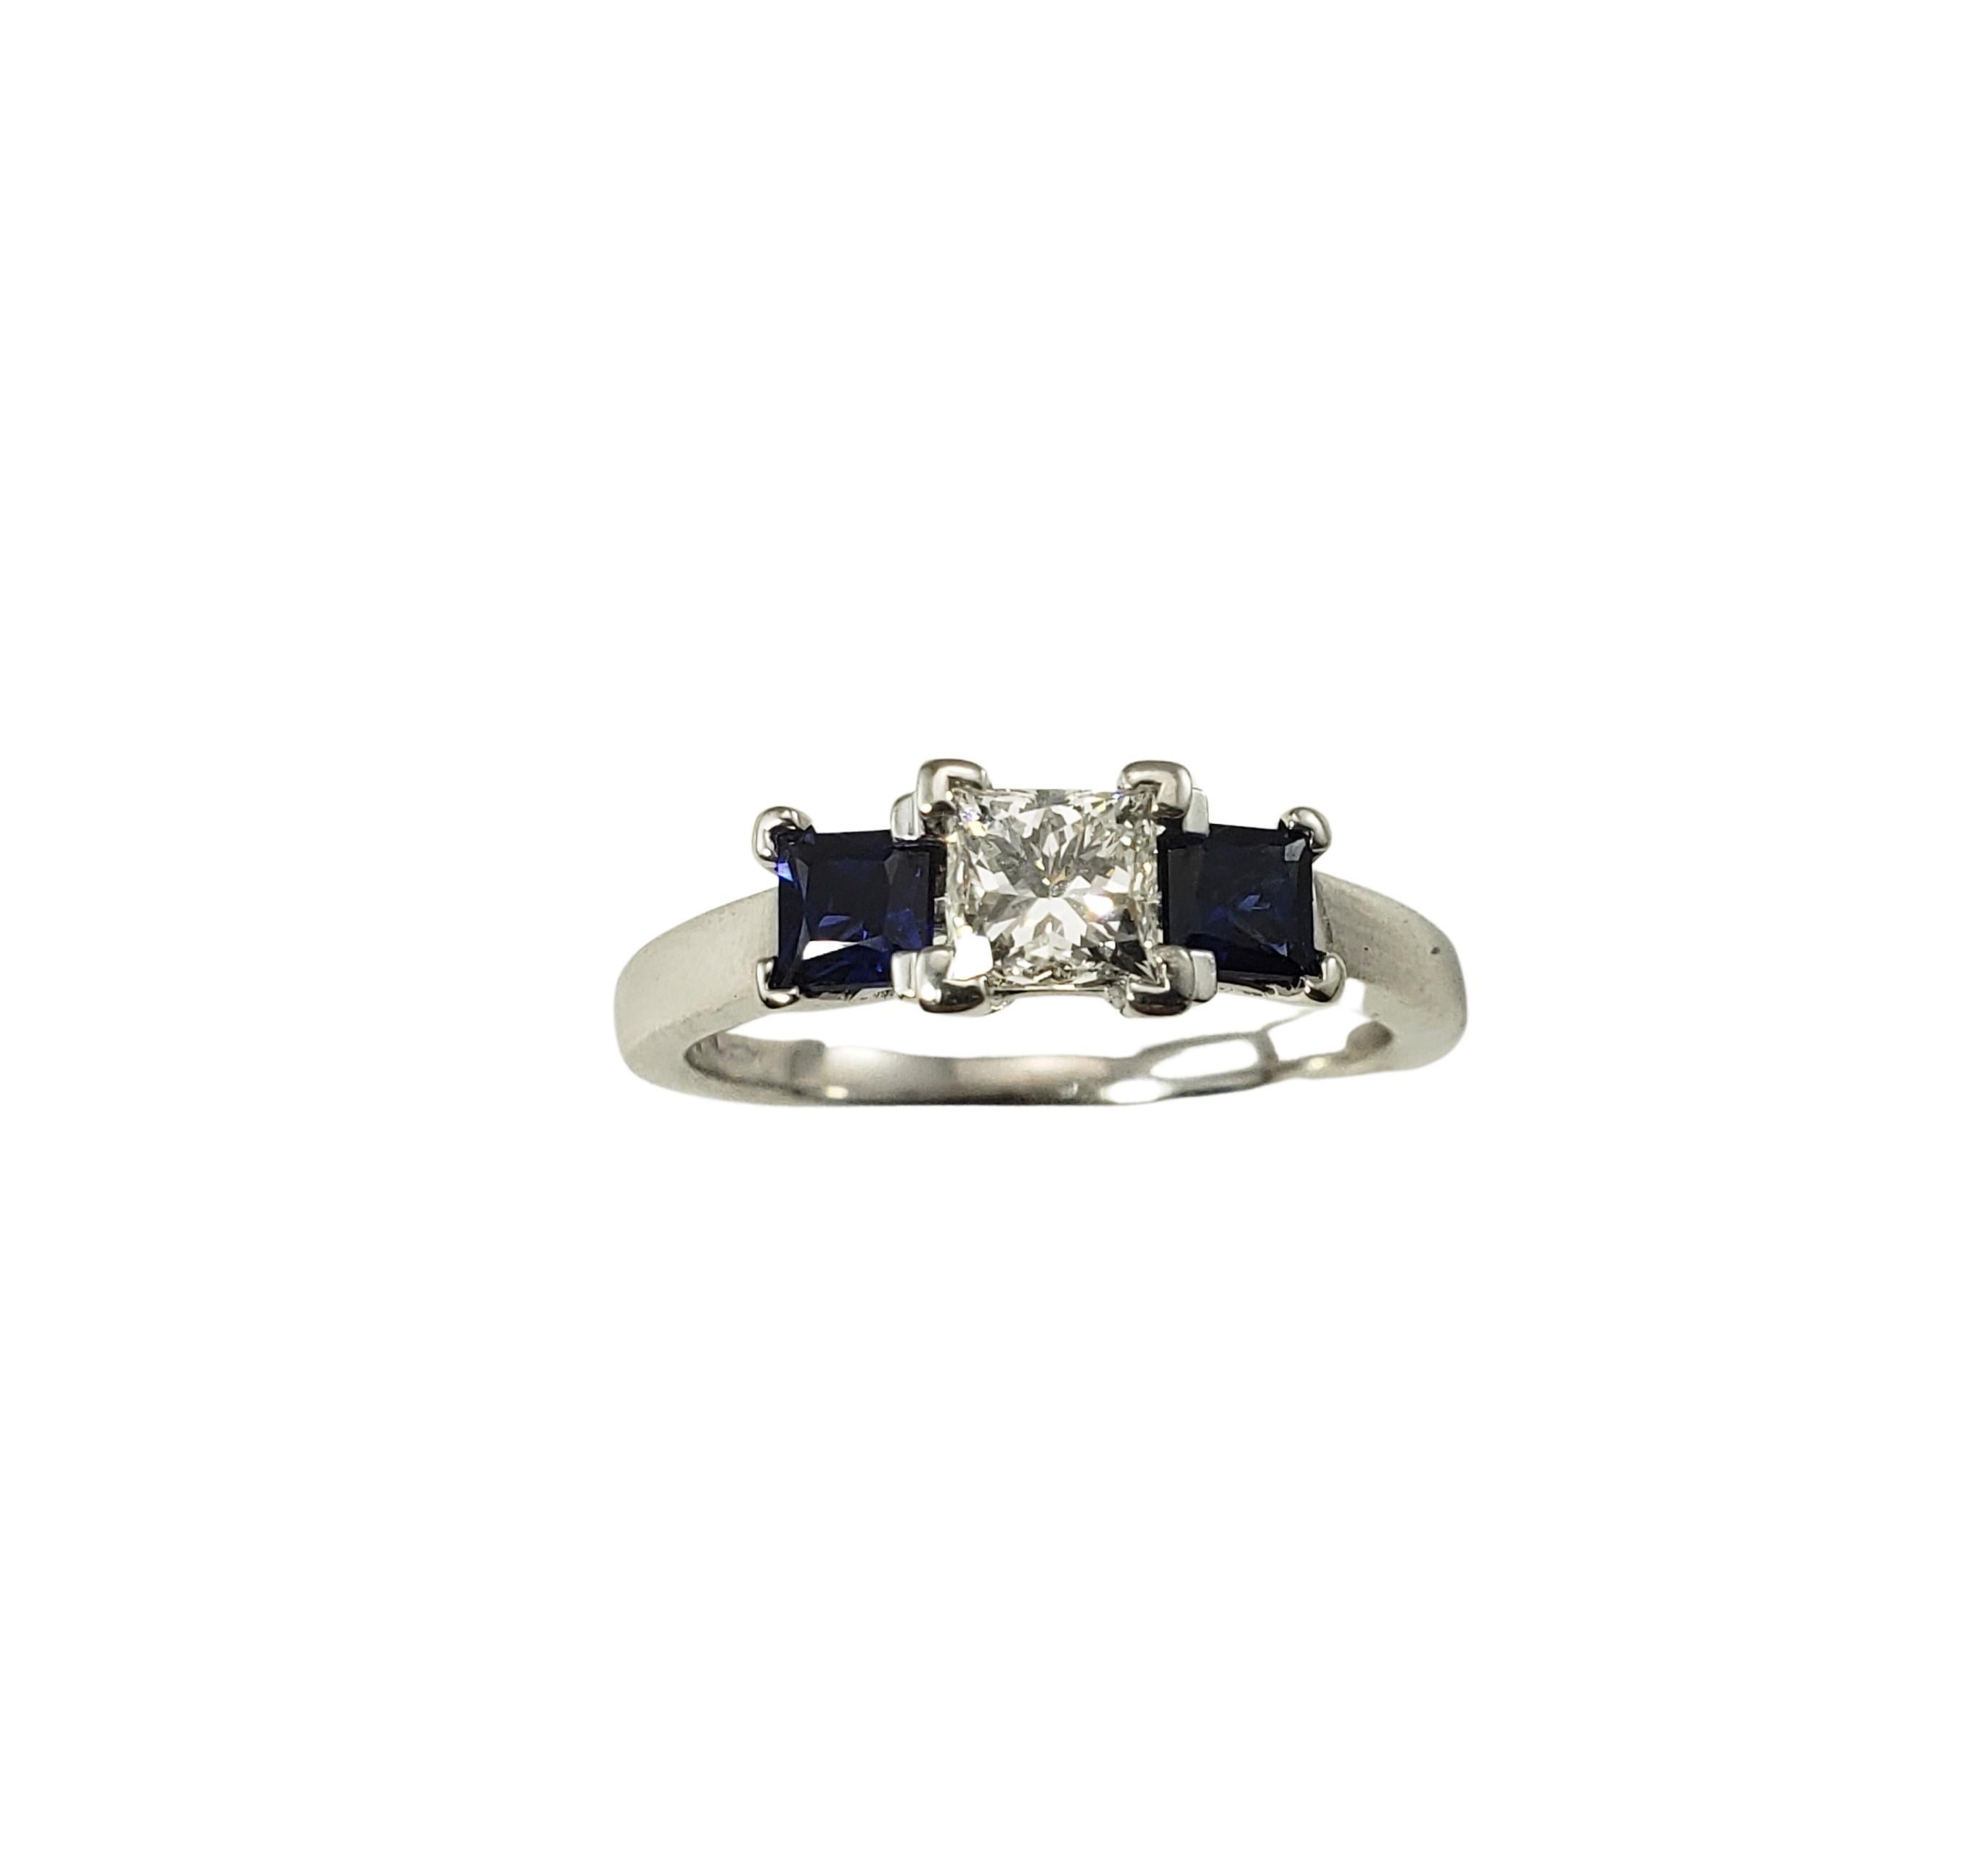 14 Karat White Gold Diamond and Sapphire Ring Size 7 GAI Certified-

This stunning ring features one princess cut diamond and two princess cut sapphires set in classic 14K white gold.  Shank: 2 mm.

Total sapphire weight:  .64 ct.

Total diamond